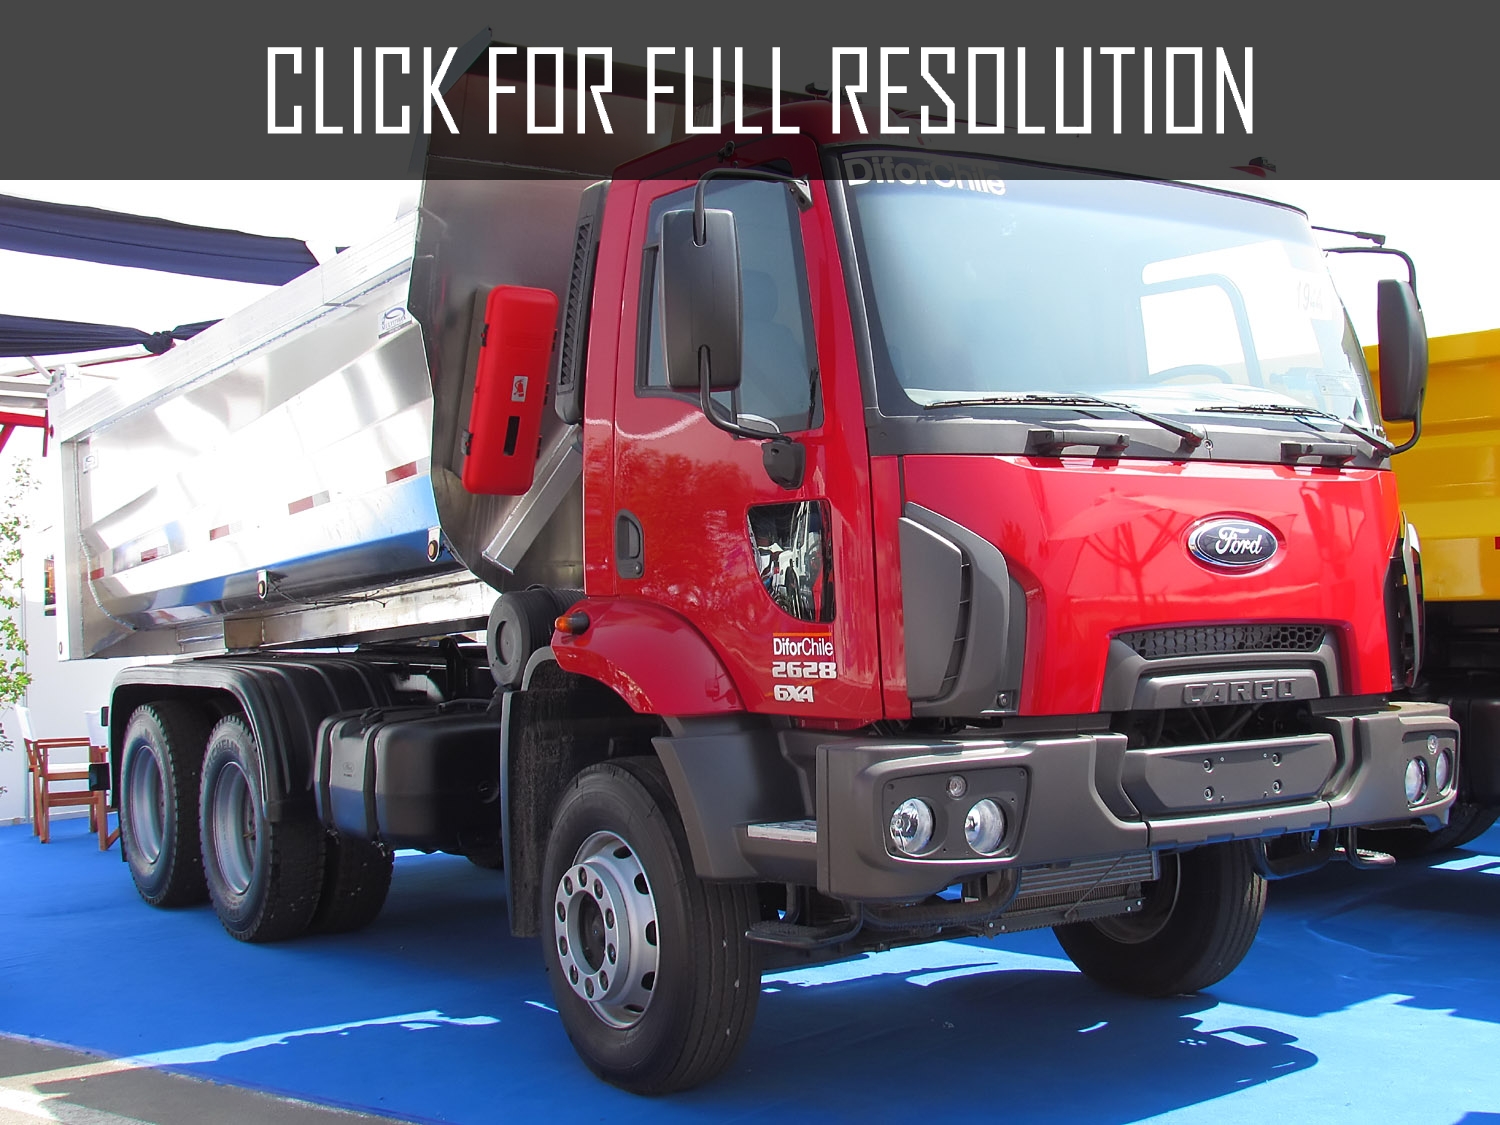 Ford Cargo 2013